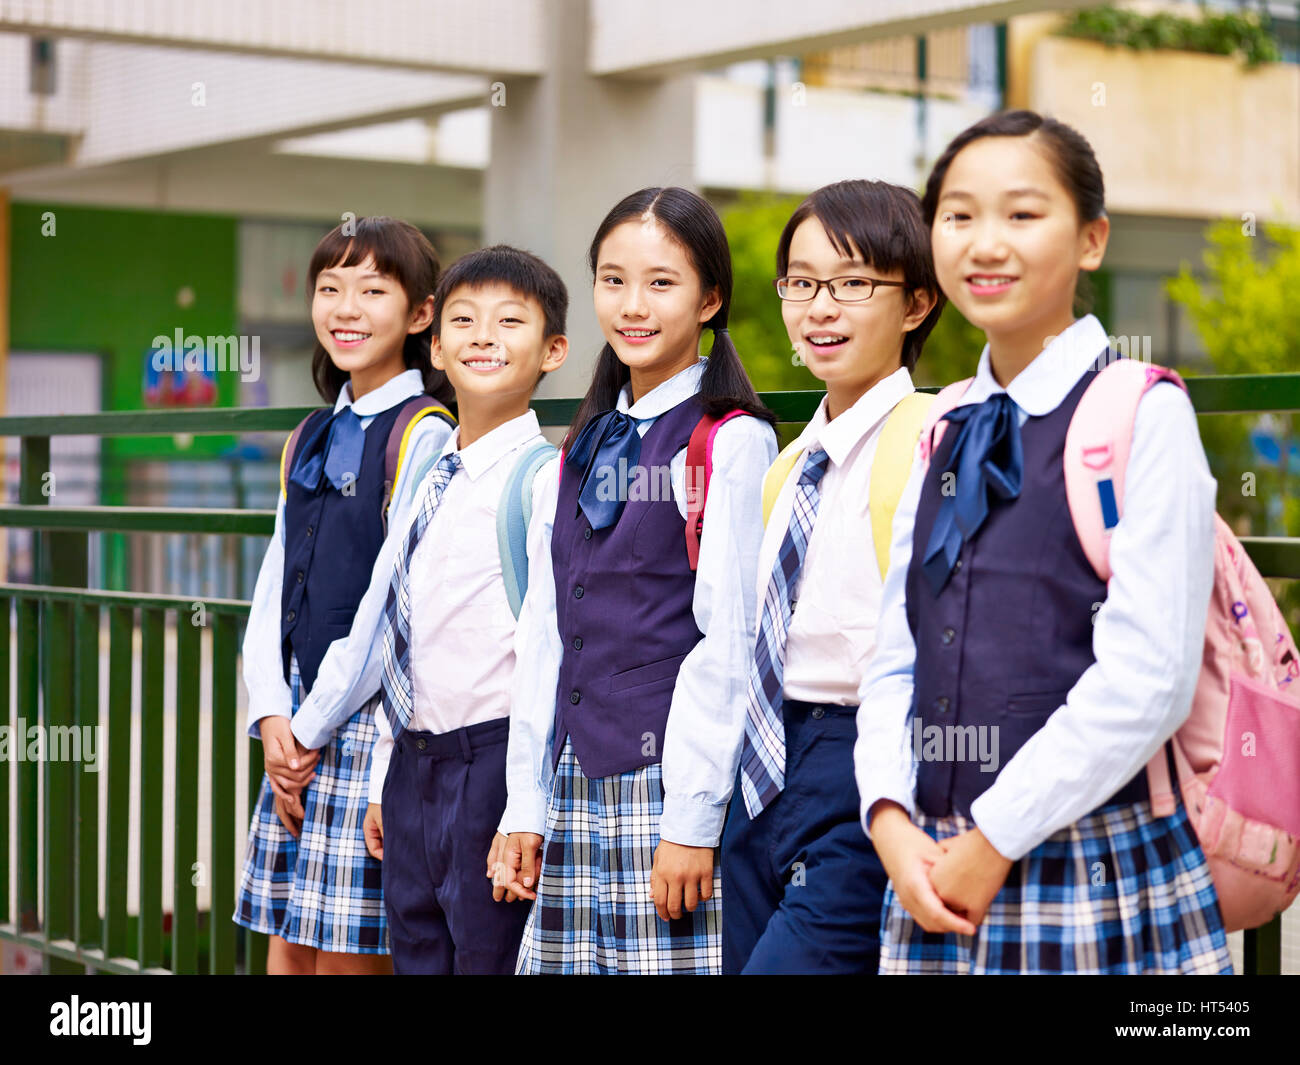 portrait of a group of asian elementary school children looking at camera smiling Stock Photo